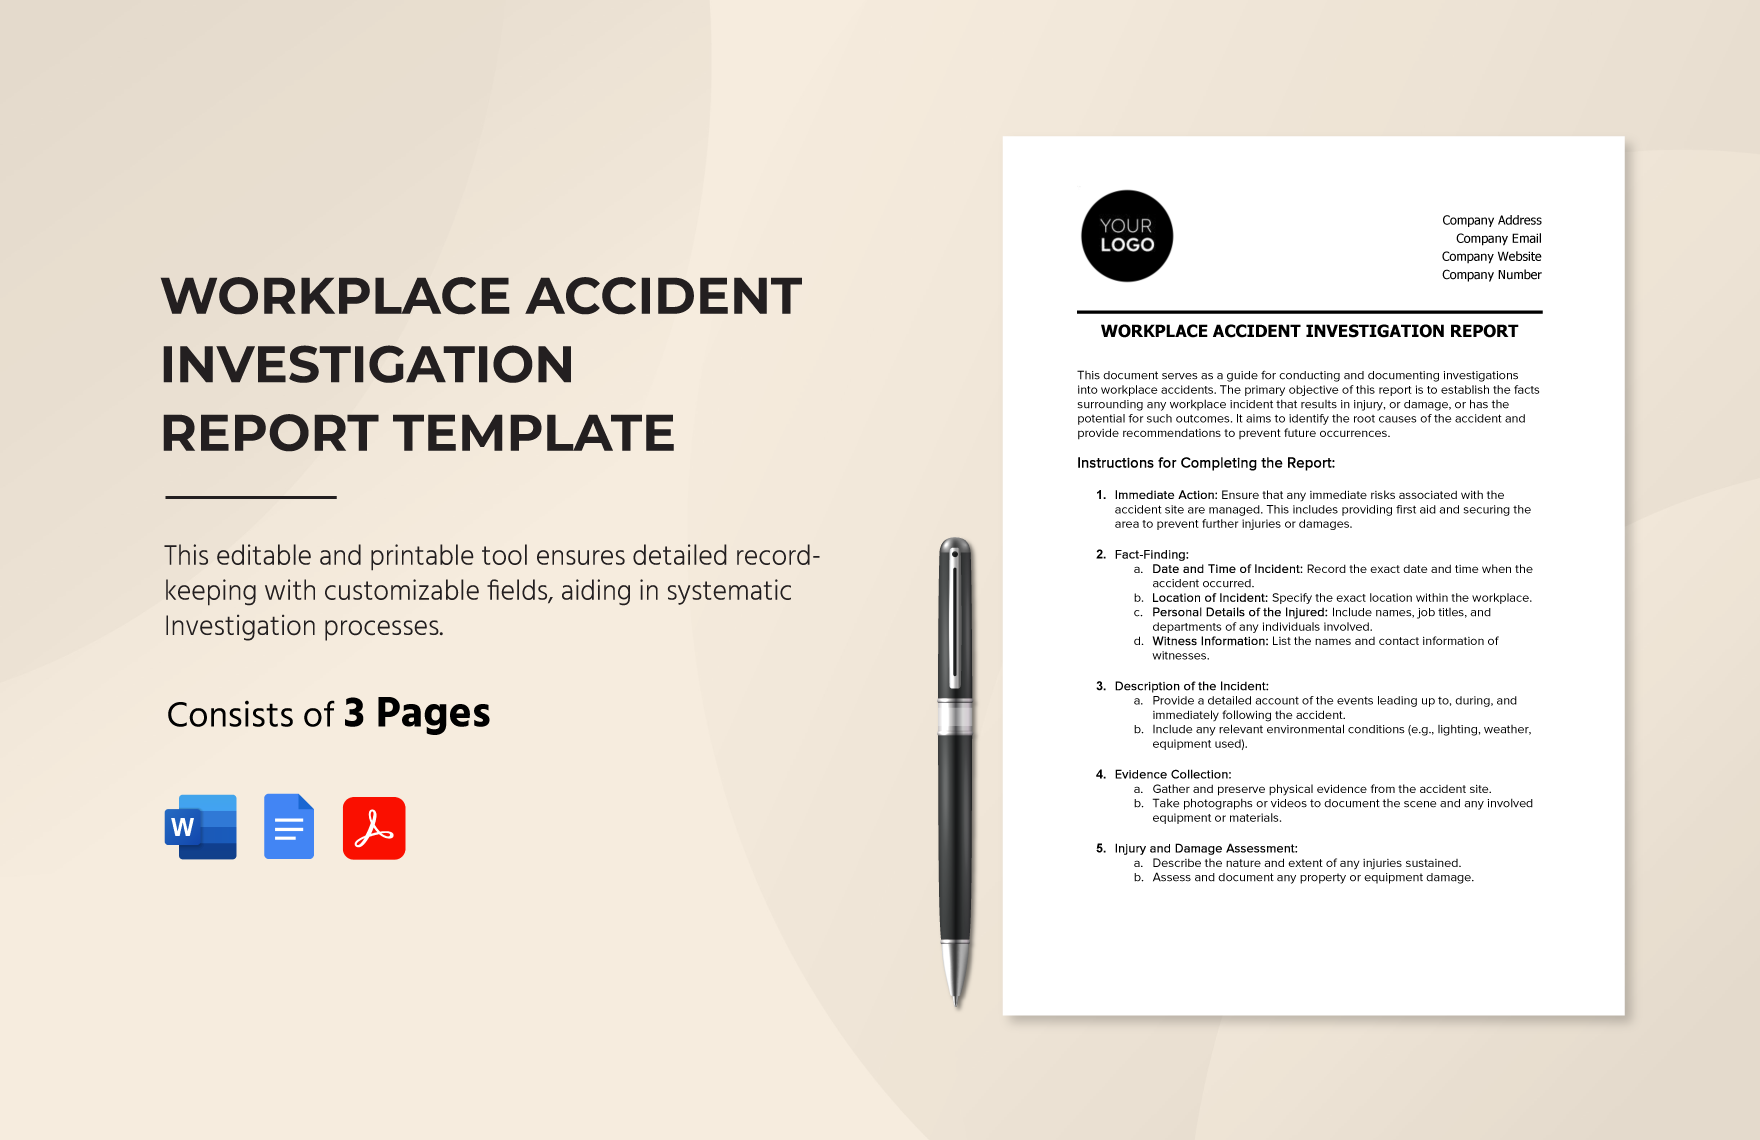 Workplace Accident Investigation Report Template in Word, Google Docs, PDF